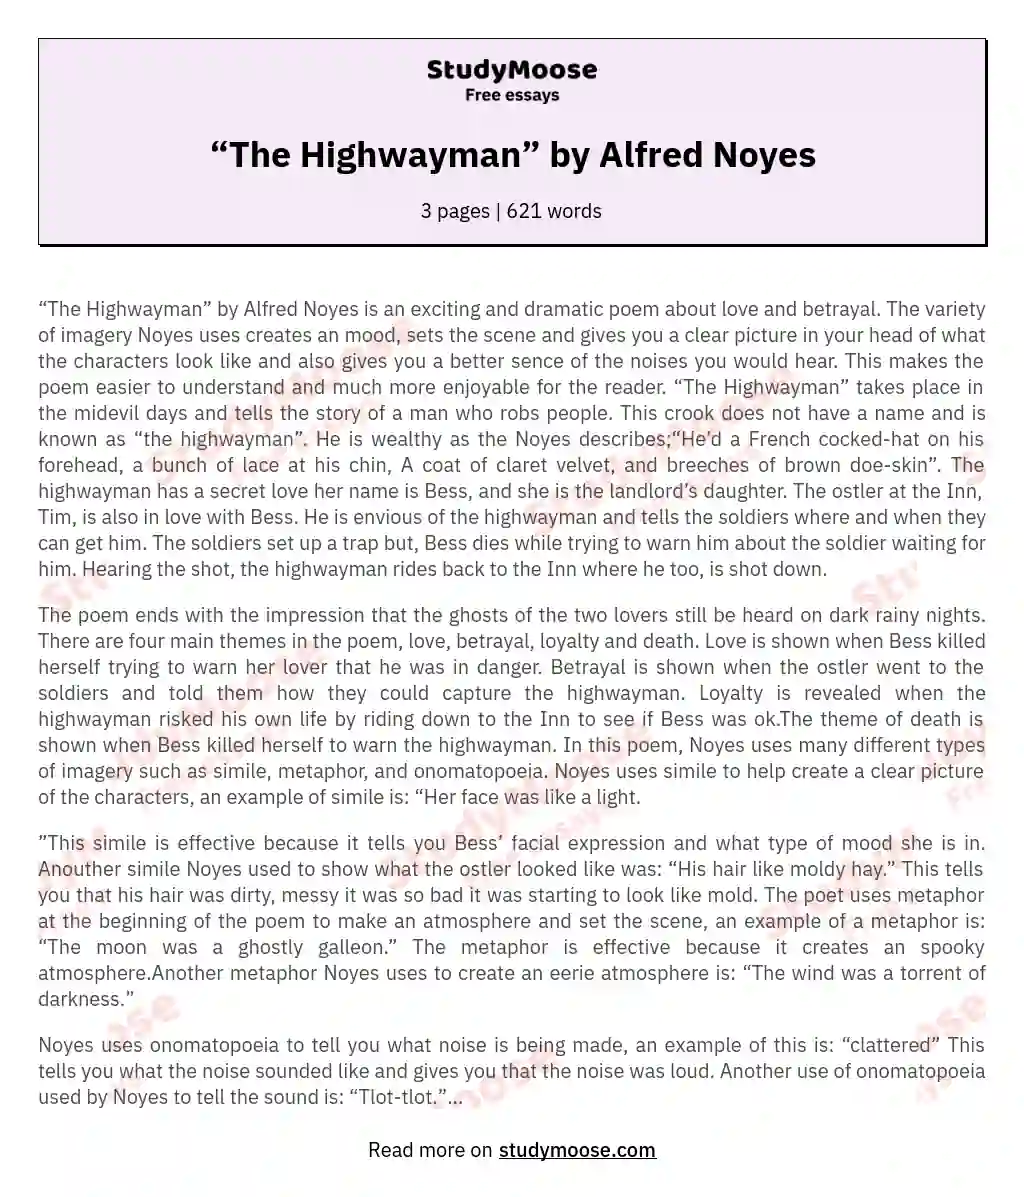 “The Highwayman” by Alfred Noyes essay